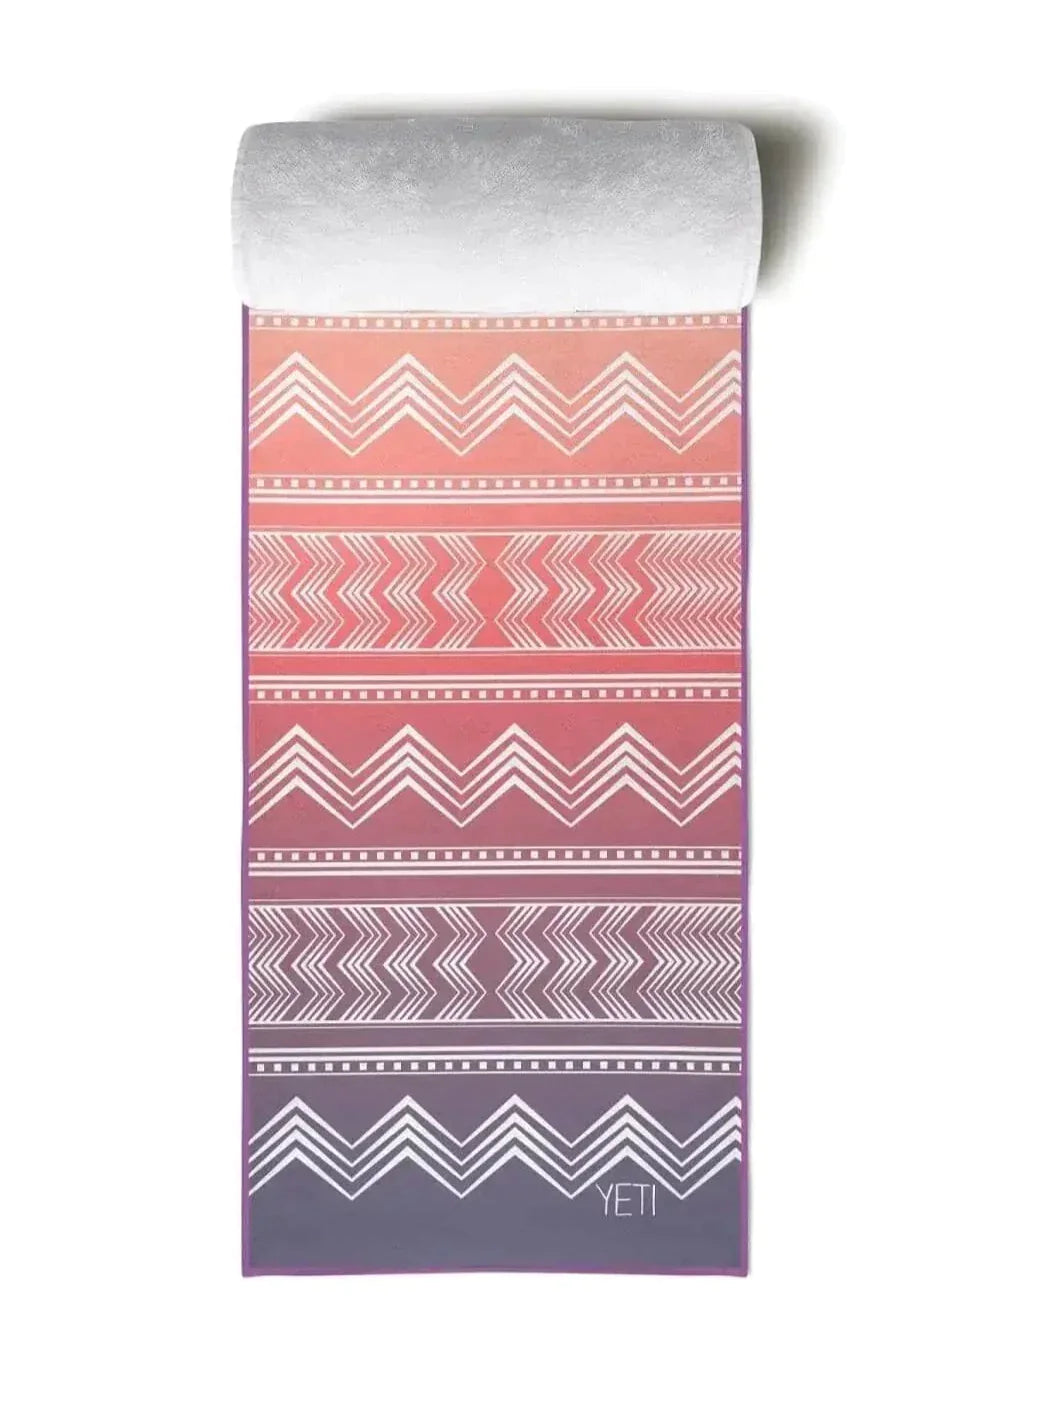 The "Cassady" Super Grip Yoga Towel from Yune and Yeti Yoga Co.